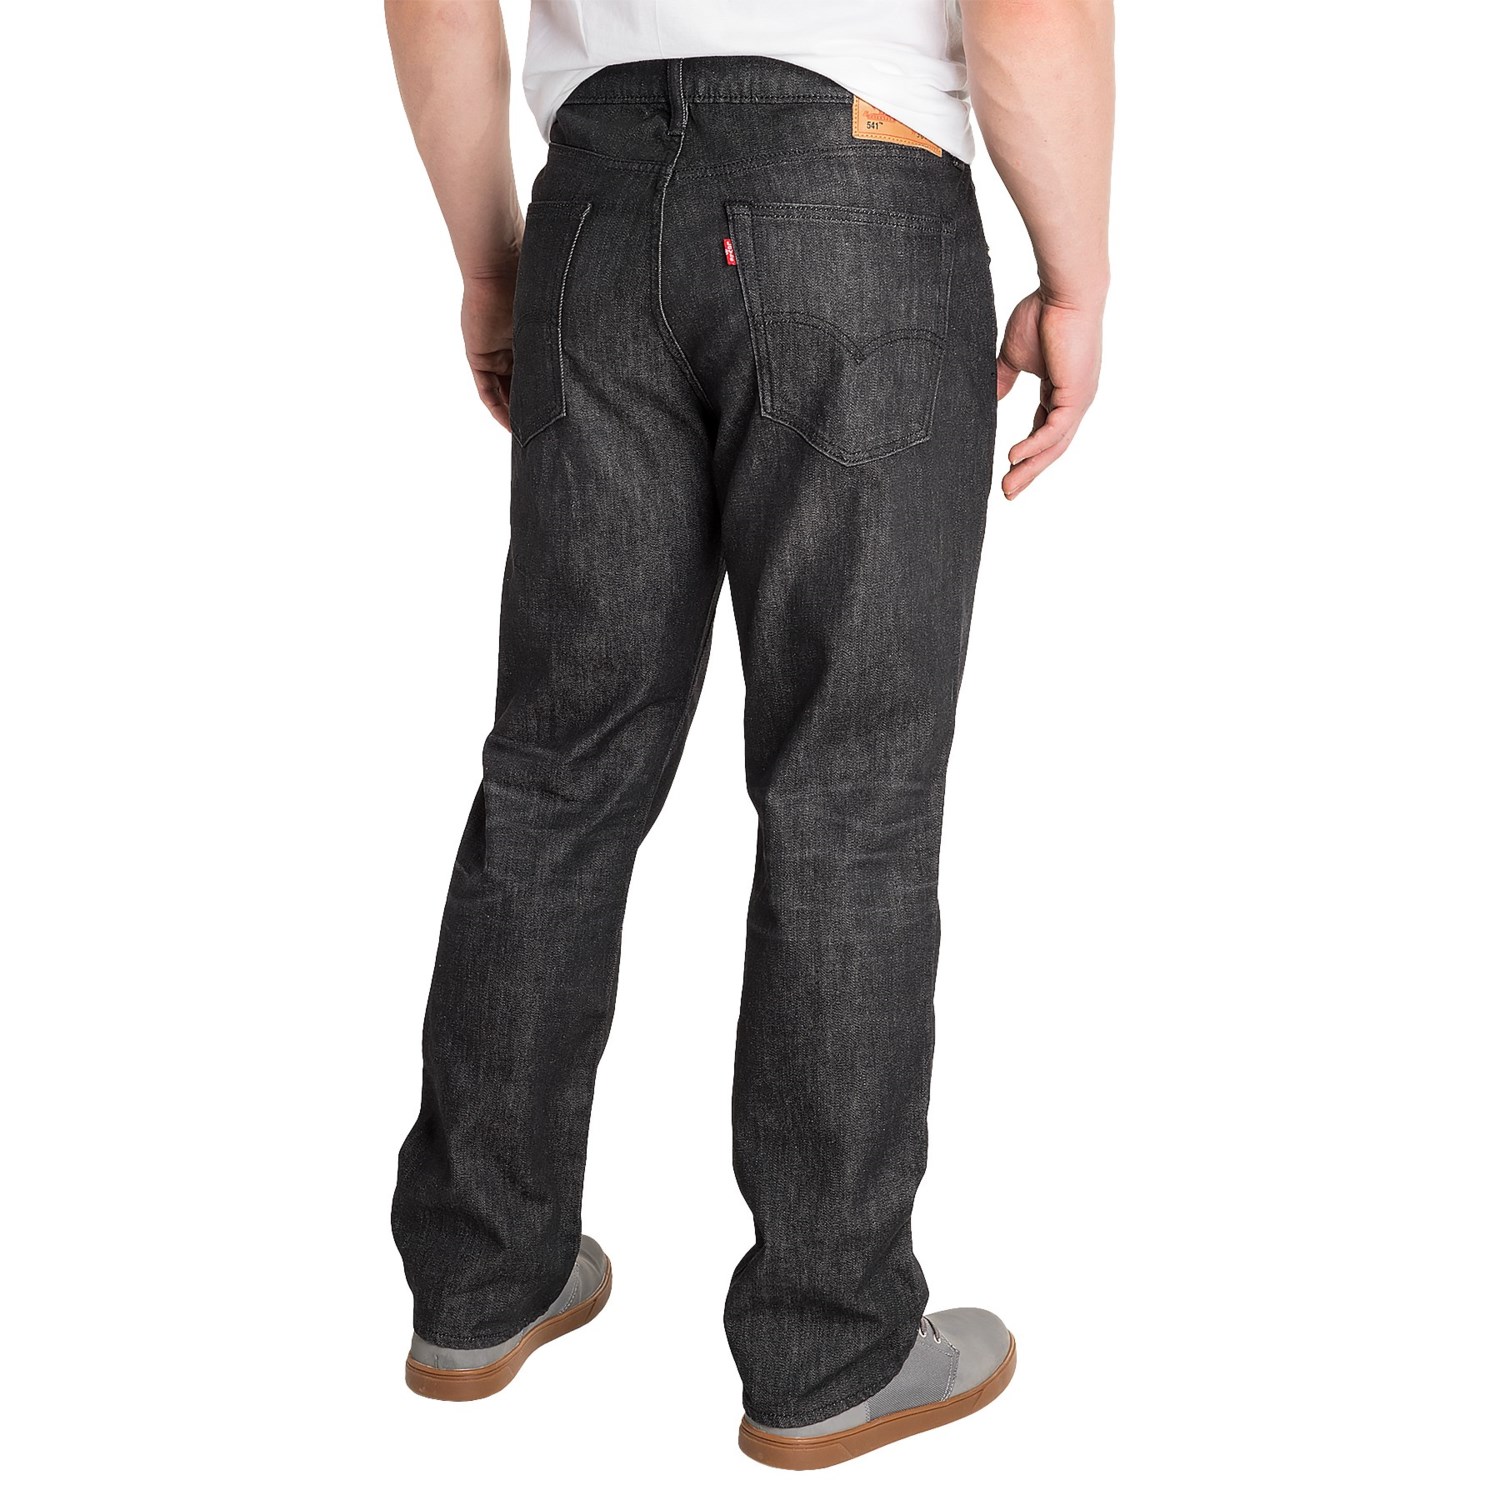 Levi’s 541 Athletic Fit Stretch Jeans (For Men) - Save 64%